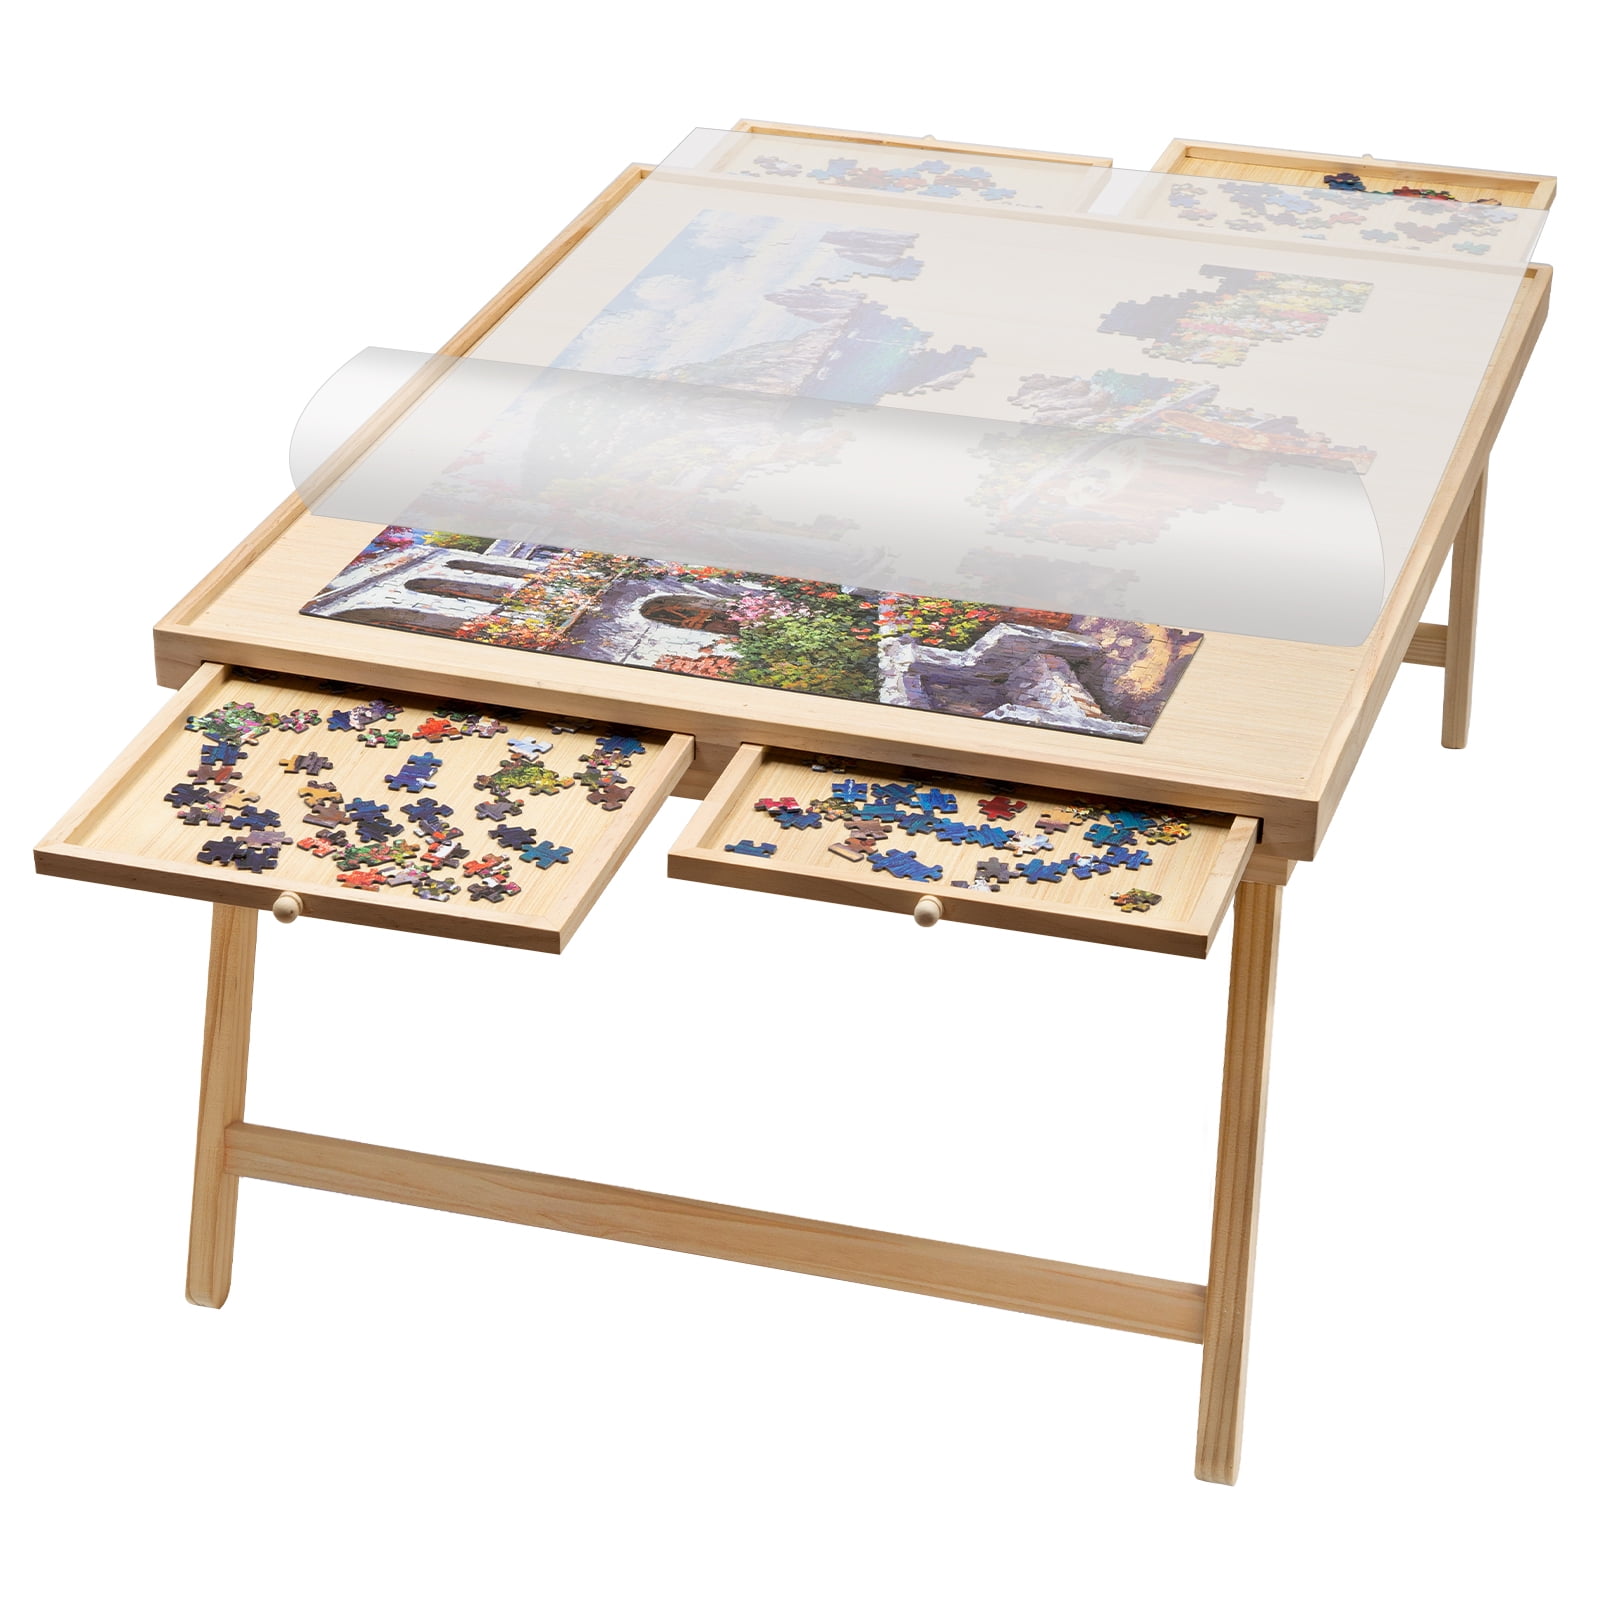 Rose Home Fashion 1500 Pcs Puzzle Board Wooden Jigsaw Puzzle Table with  Folding Legs 4 Drawers, 1 Set of Accessories & Reviews